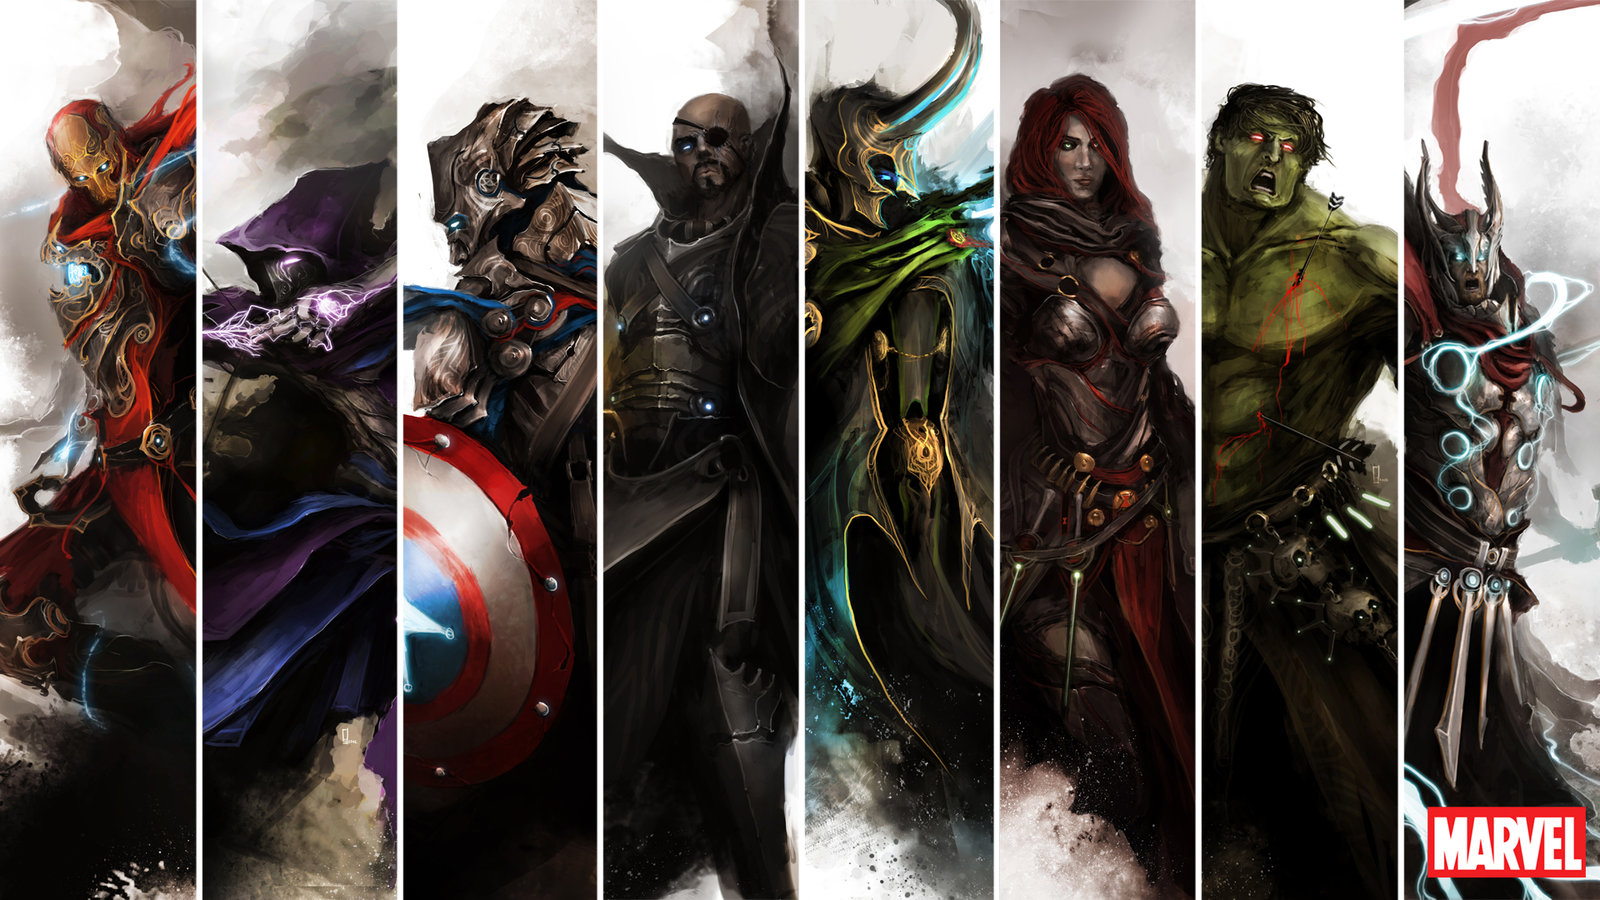 the_avengers_by_thedurrrrian-d55trk8.jpg